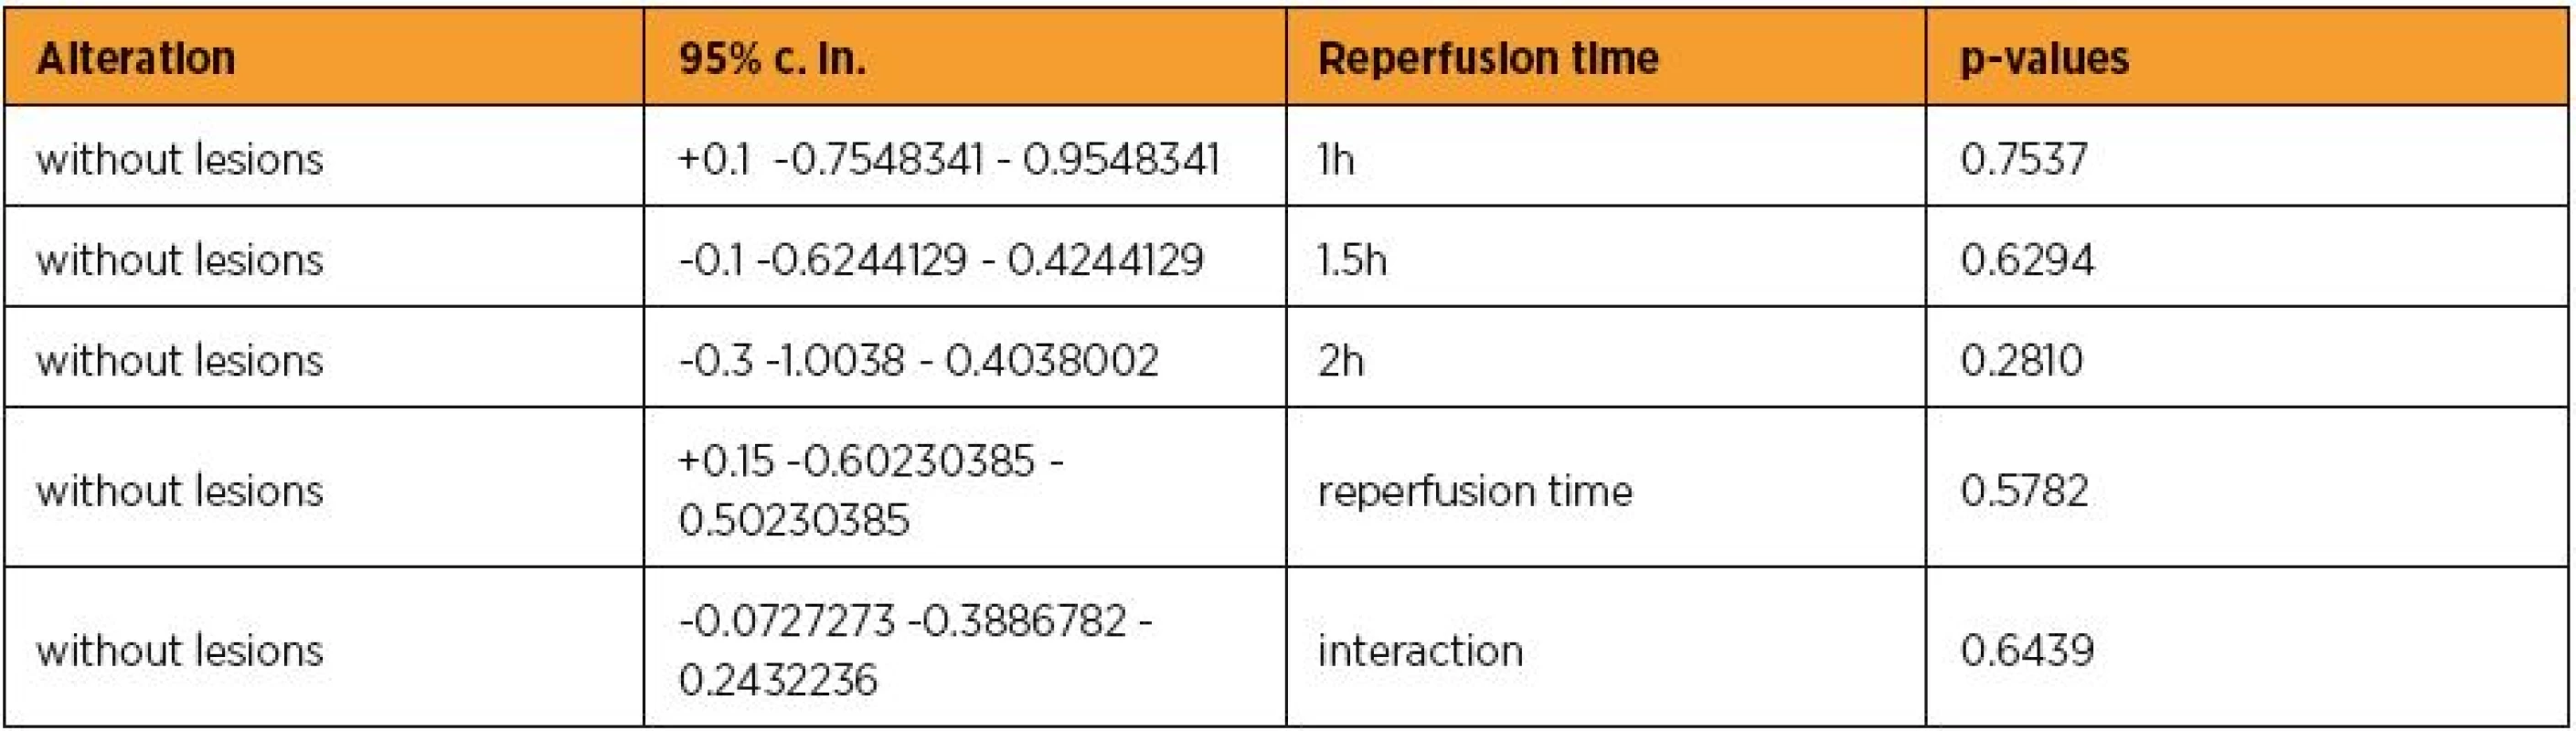 Synoptic presence of the alteration influence of erythropoietin in connection with reperfusion time